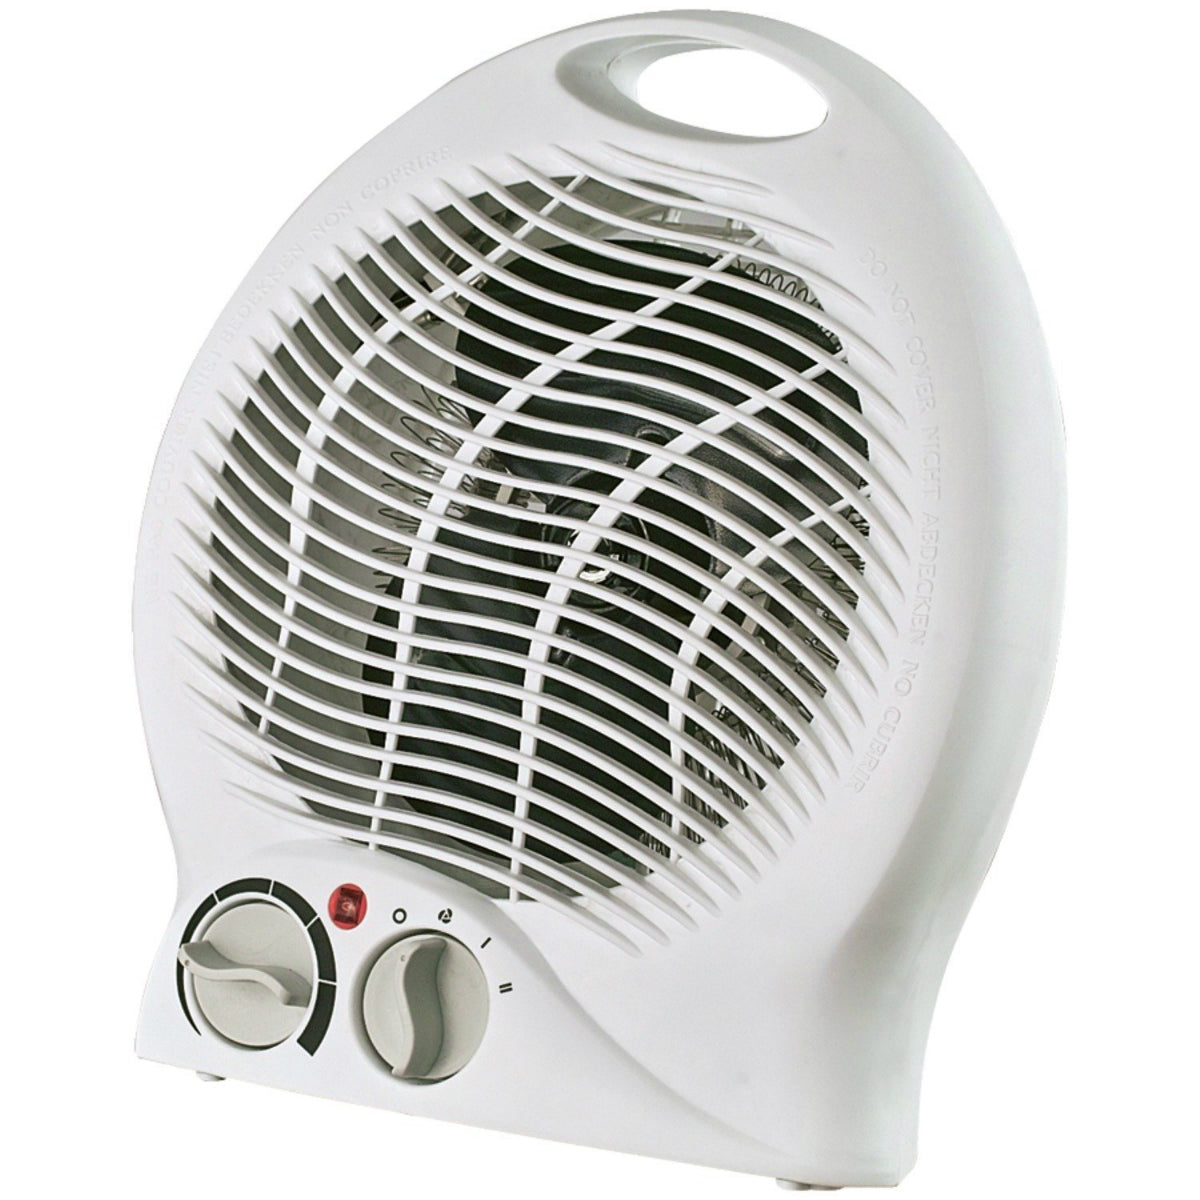 Optimus H-1322 Portable Fan Heater with Thermostat, 2-Heat Settings